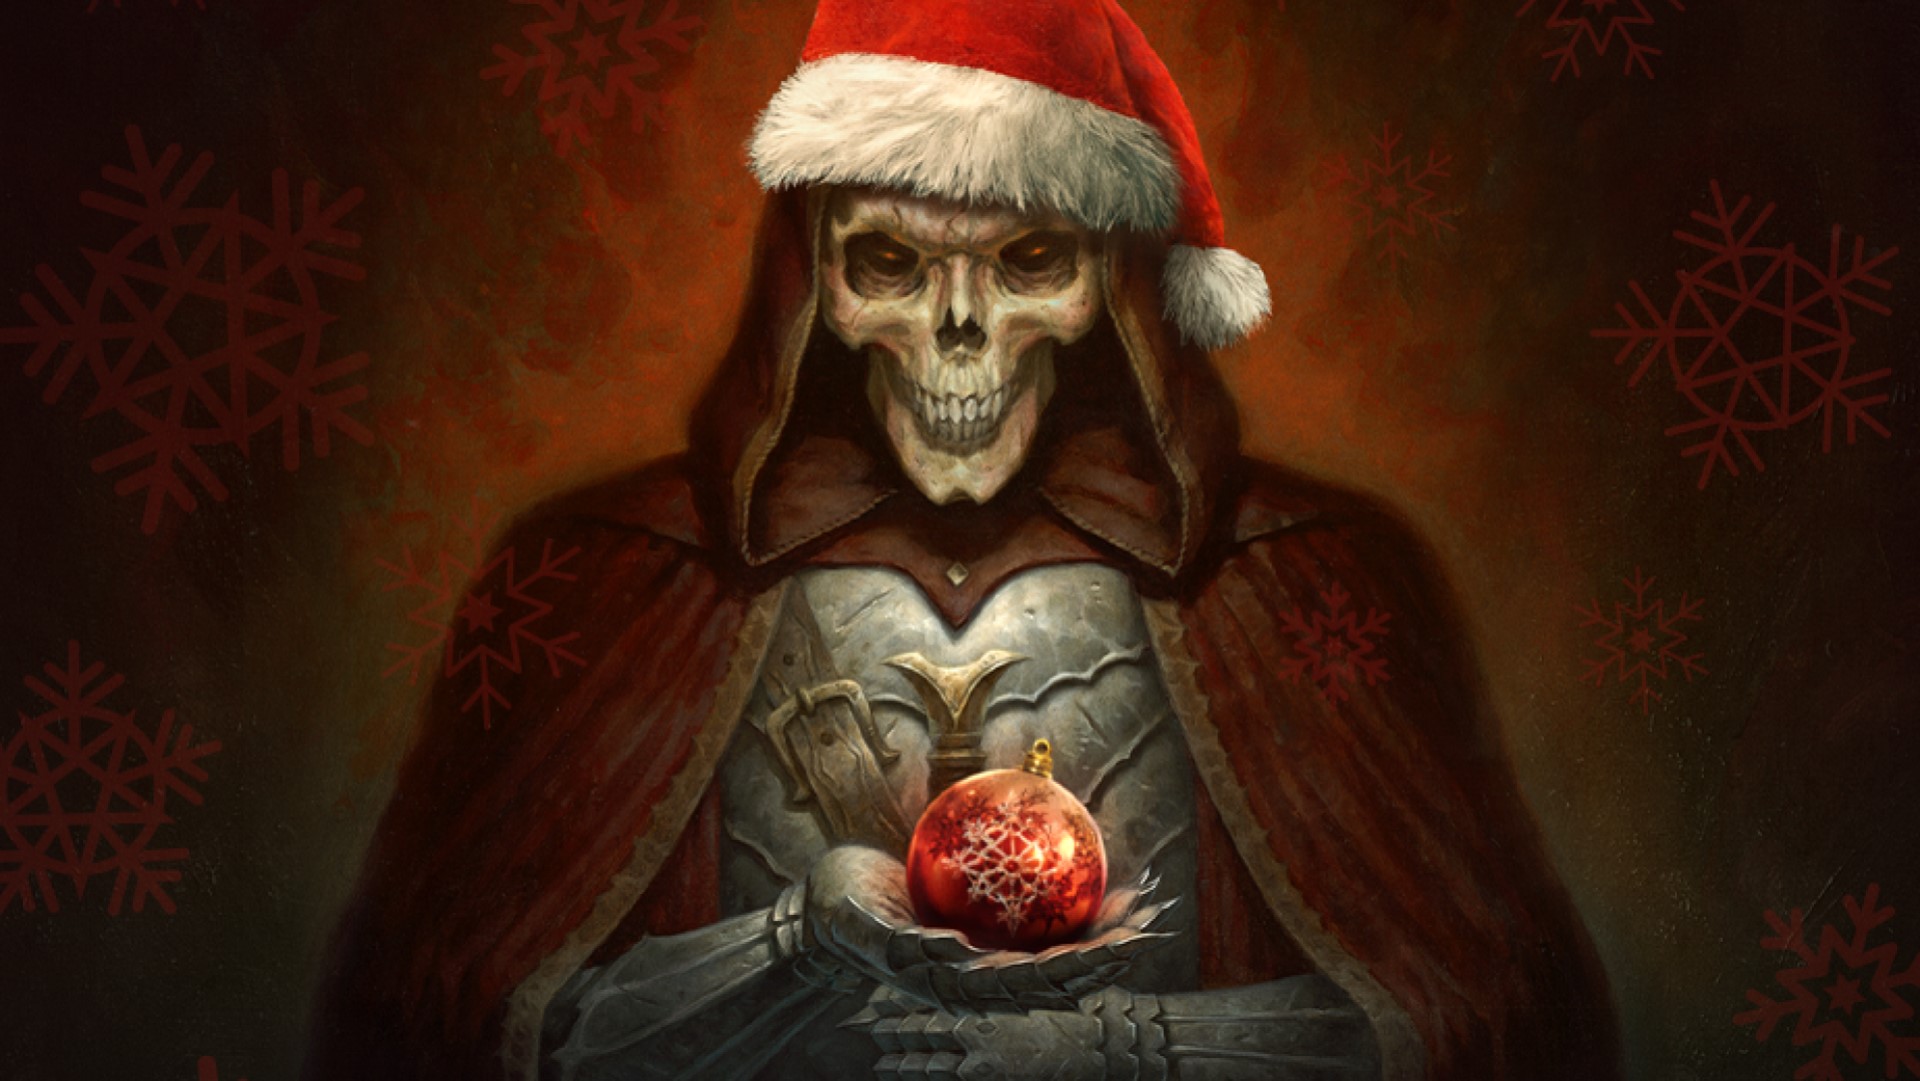 Diablo 2 Resurrected holiday event mixes things up, with demons